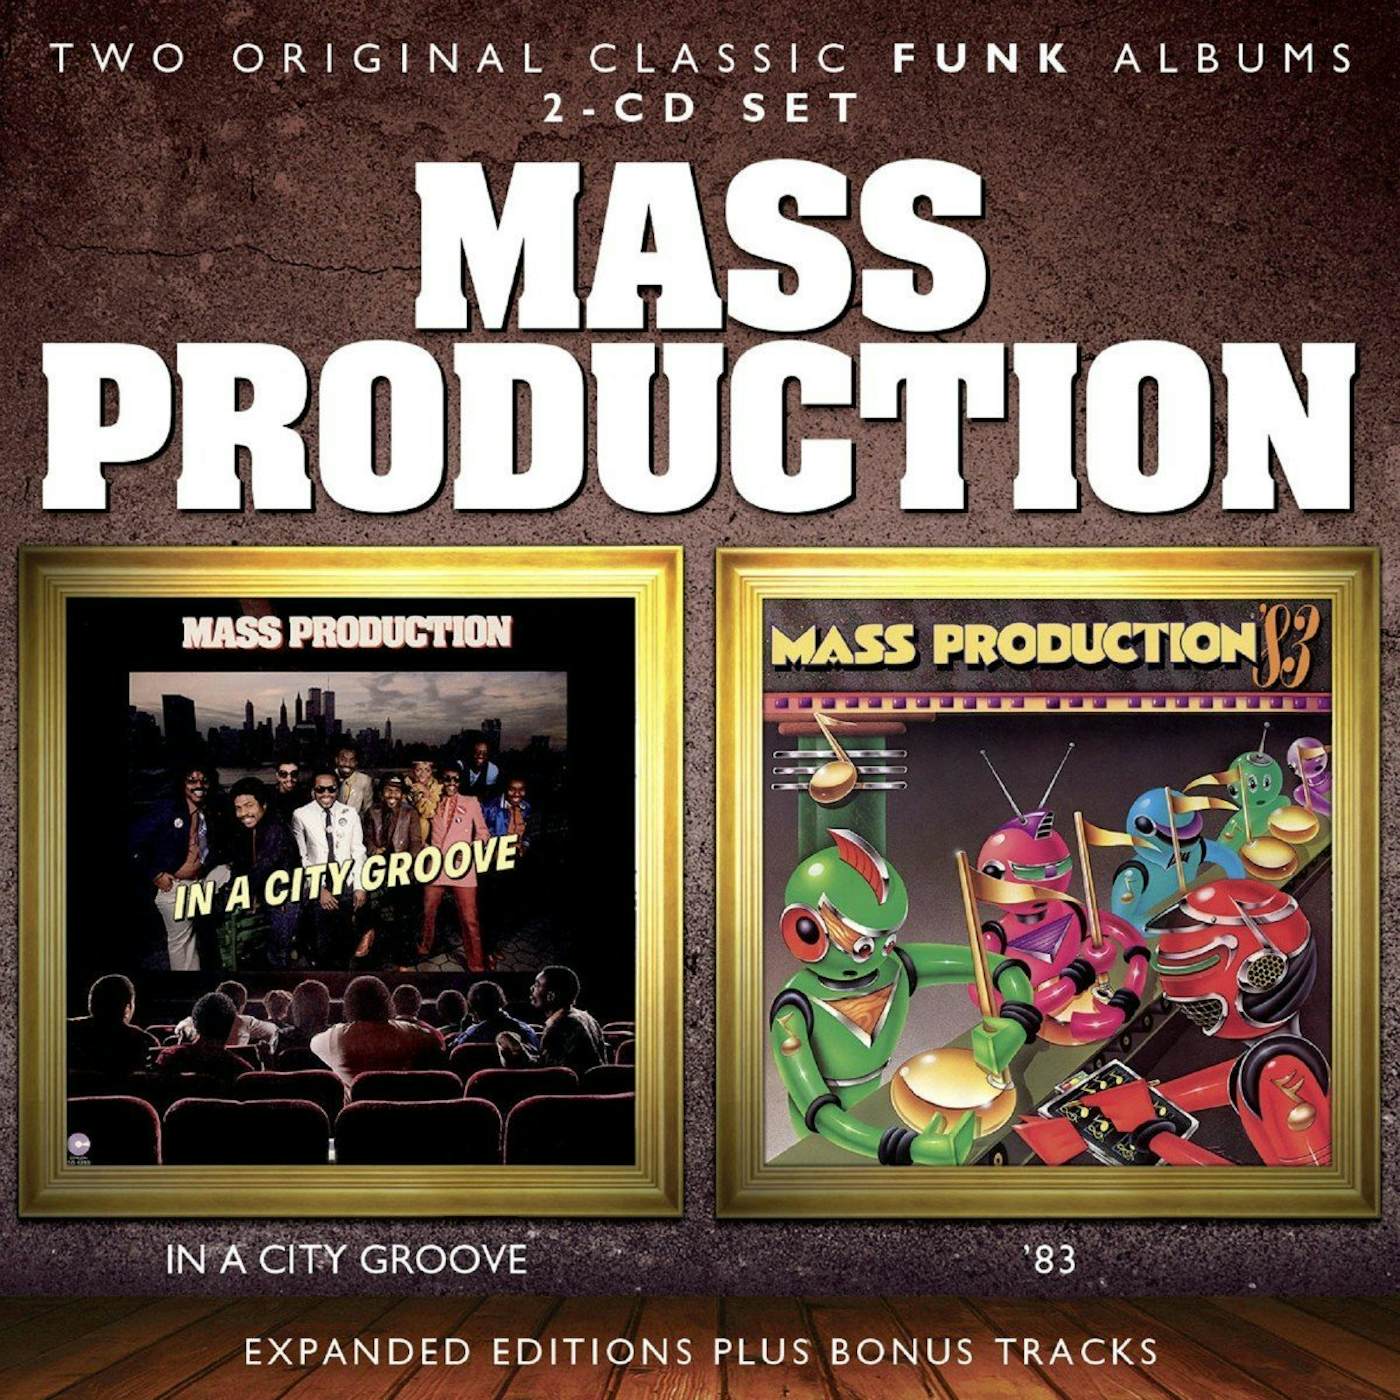 Mass Production IN A CITY GROOVE / 83 CD